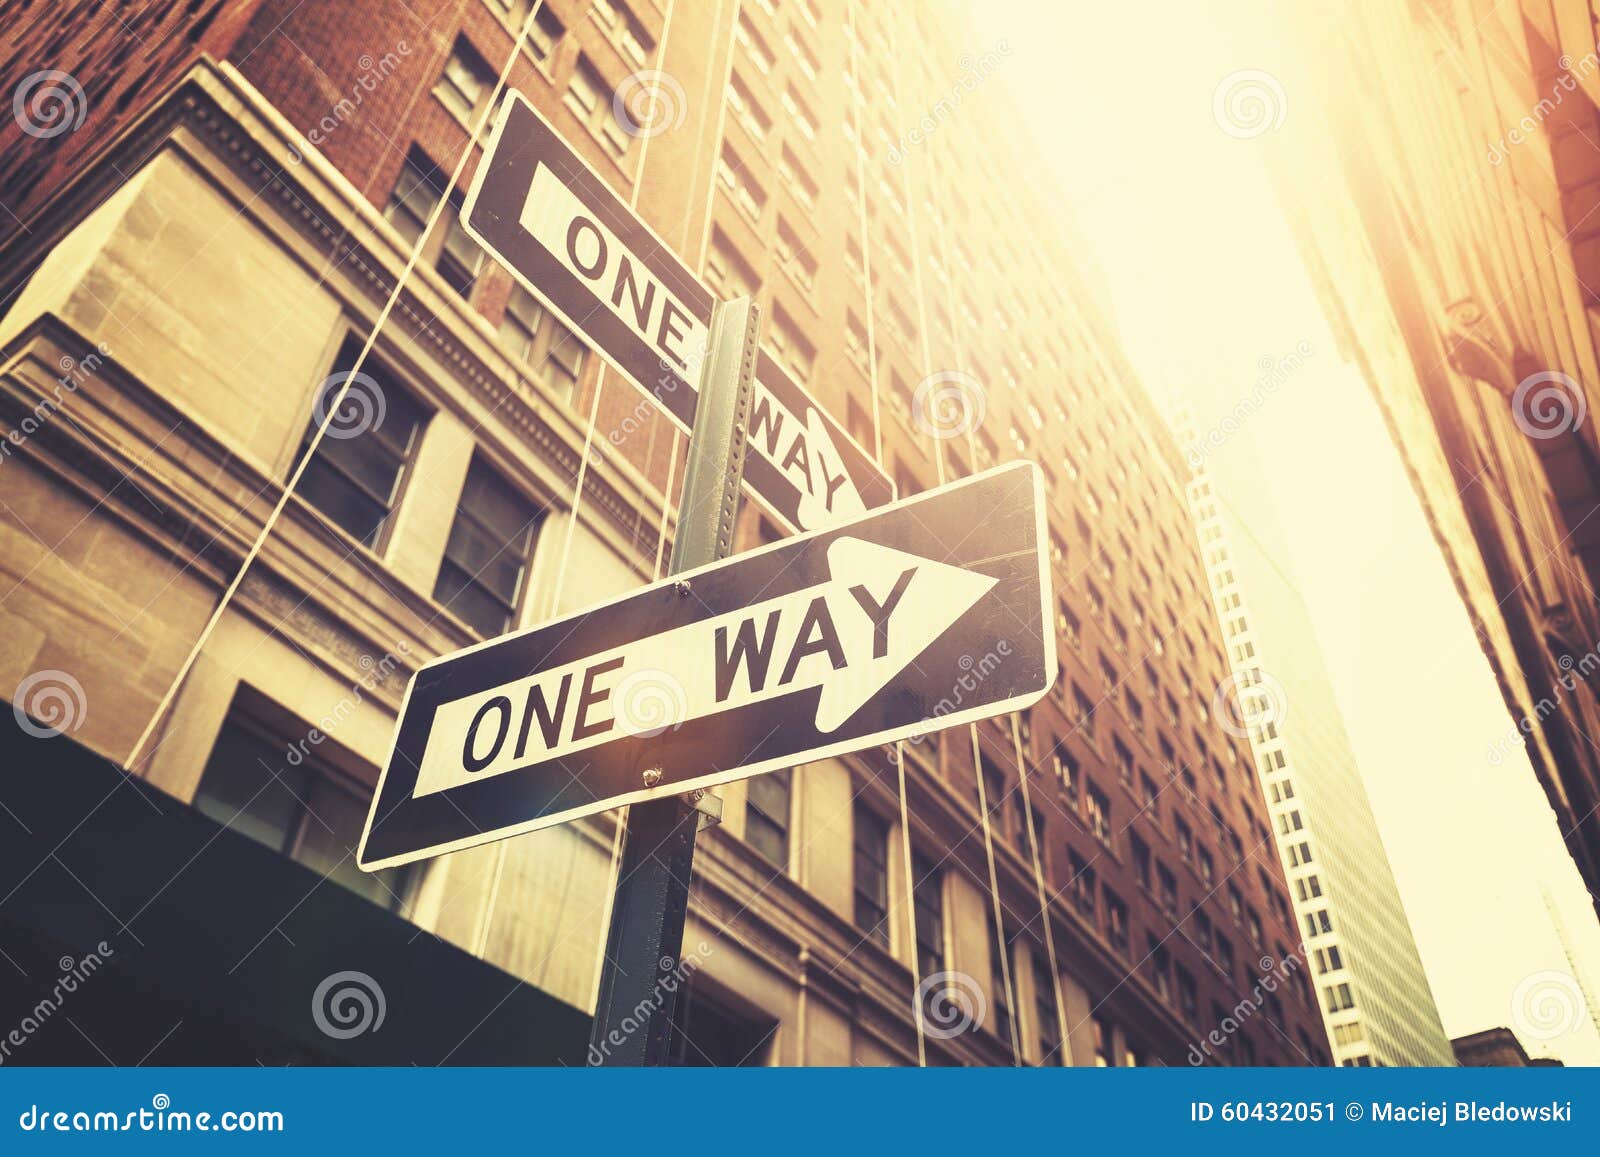 Retro Style One Way Signs On Street Of Manhattan. Stock Image - Image ... One Way Street Signs